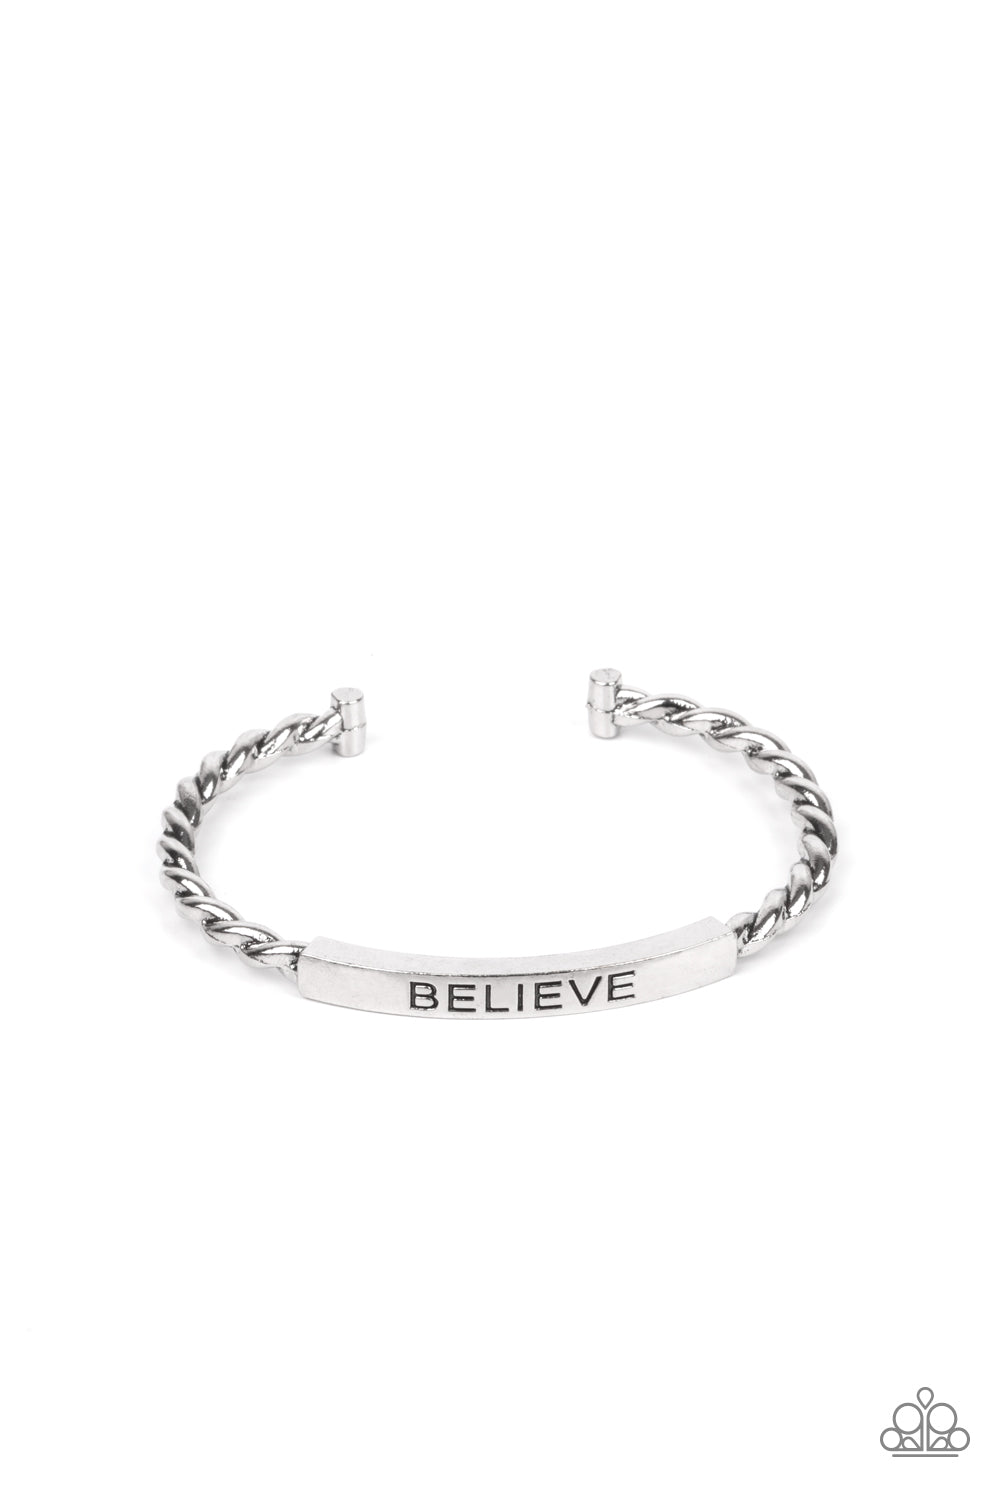 Keep Calm and Believe - Silver- Paparazzi